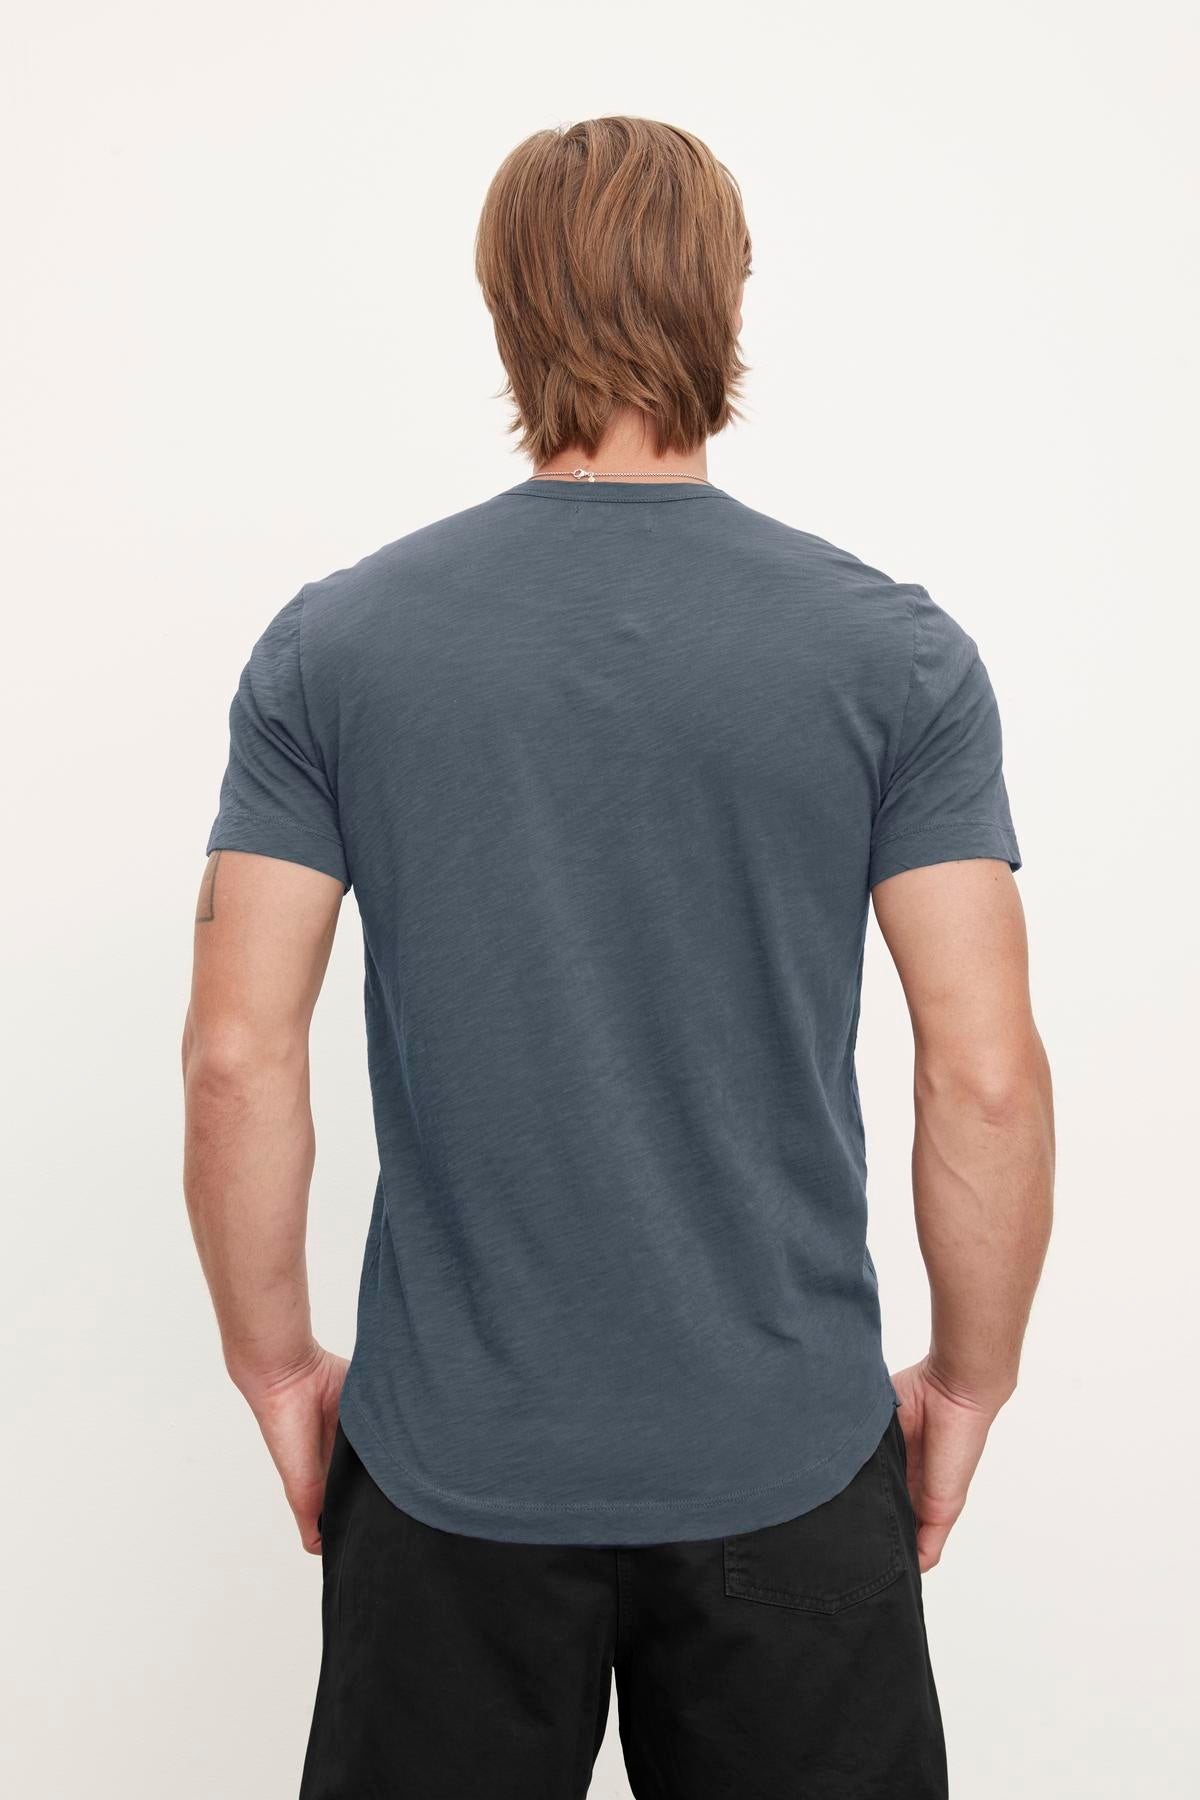 A person with shoulder-length hair is standing with their back to the camera, wearing a plain dark blue Velvet by Graham & Spencer AMARO TEE and black pants, exuding a relaxed stylish feel.-37386214441153